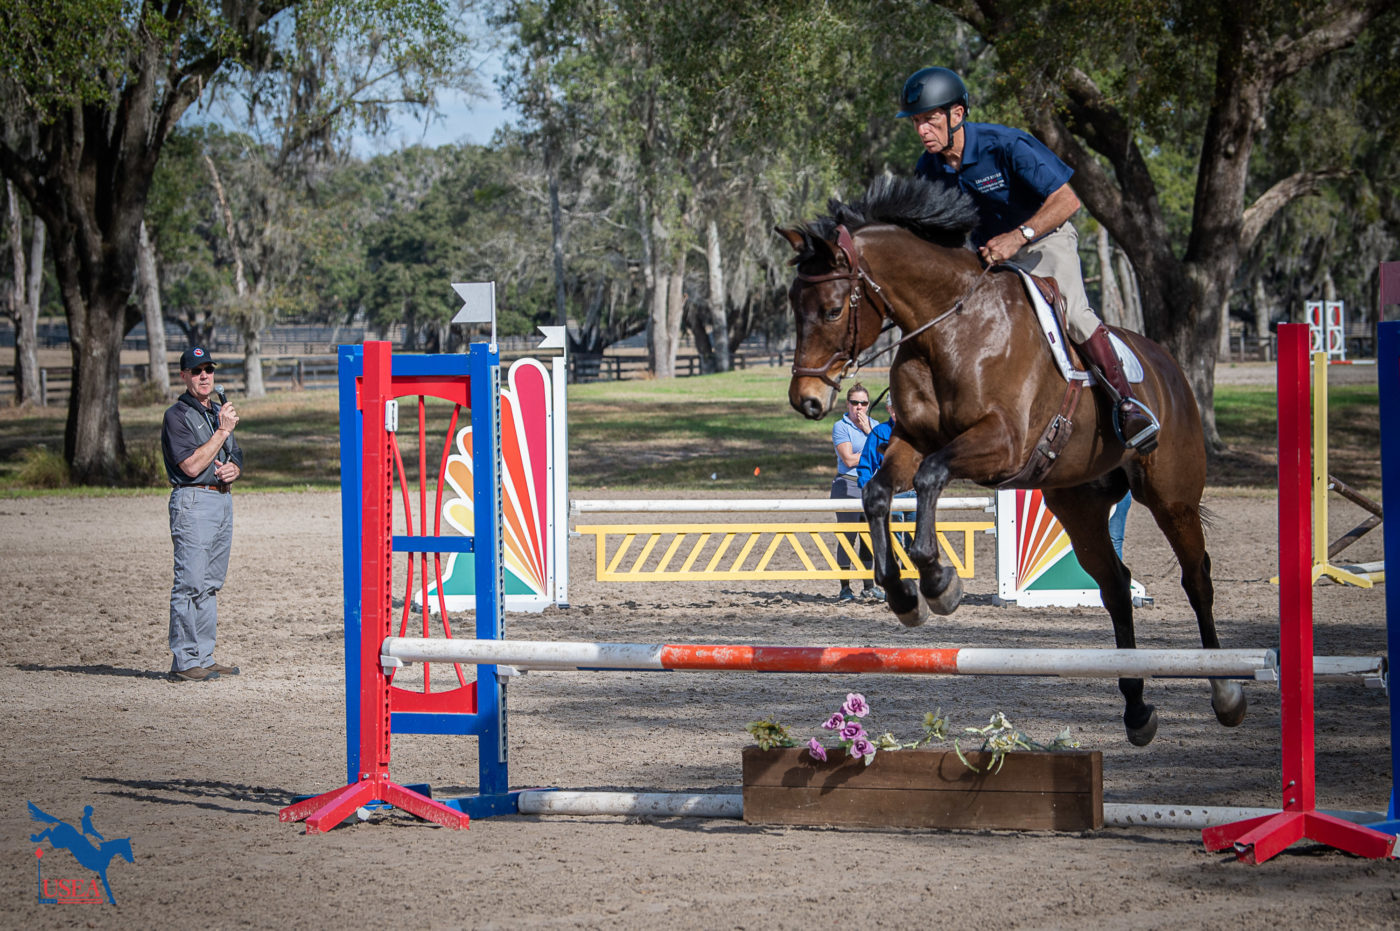 Jerry Shurink coaching the Training level demonstration rider Bill Barclay. USEA/ Meagan DeLisle photo